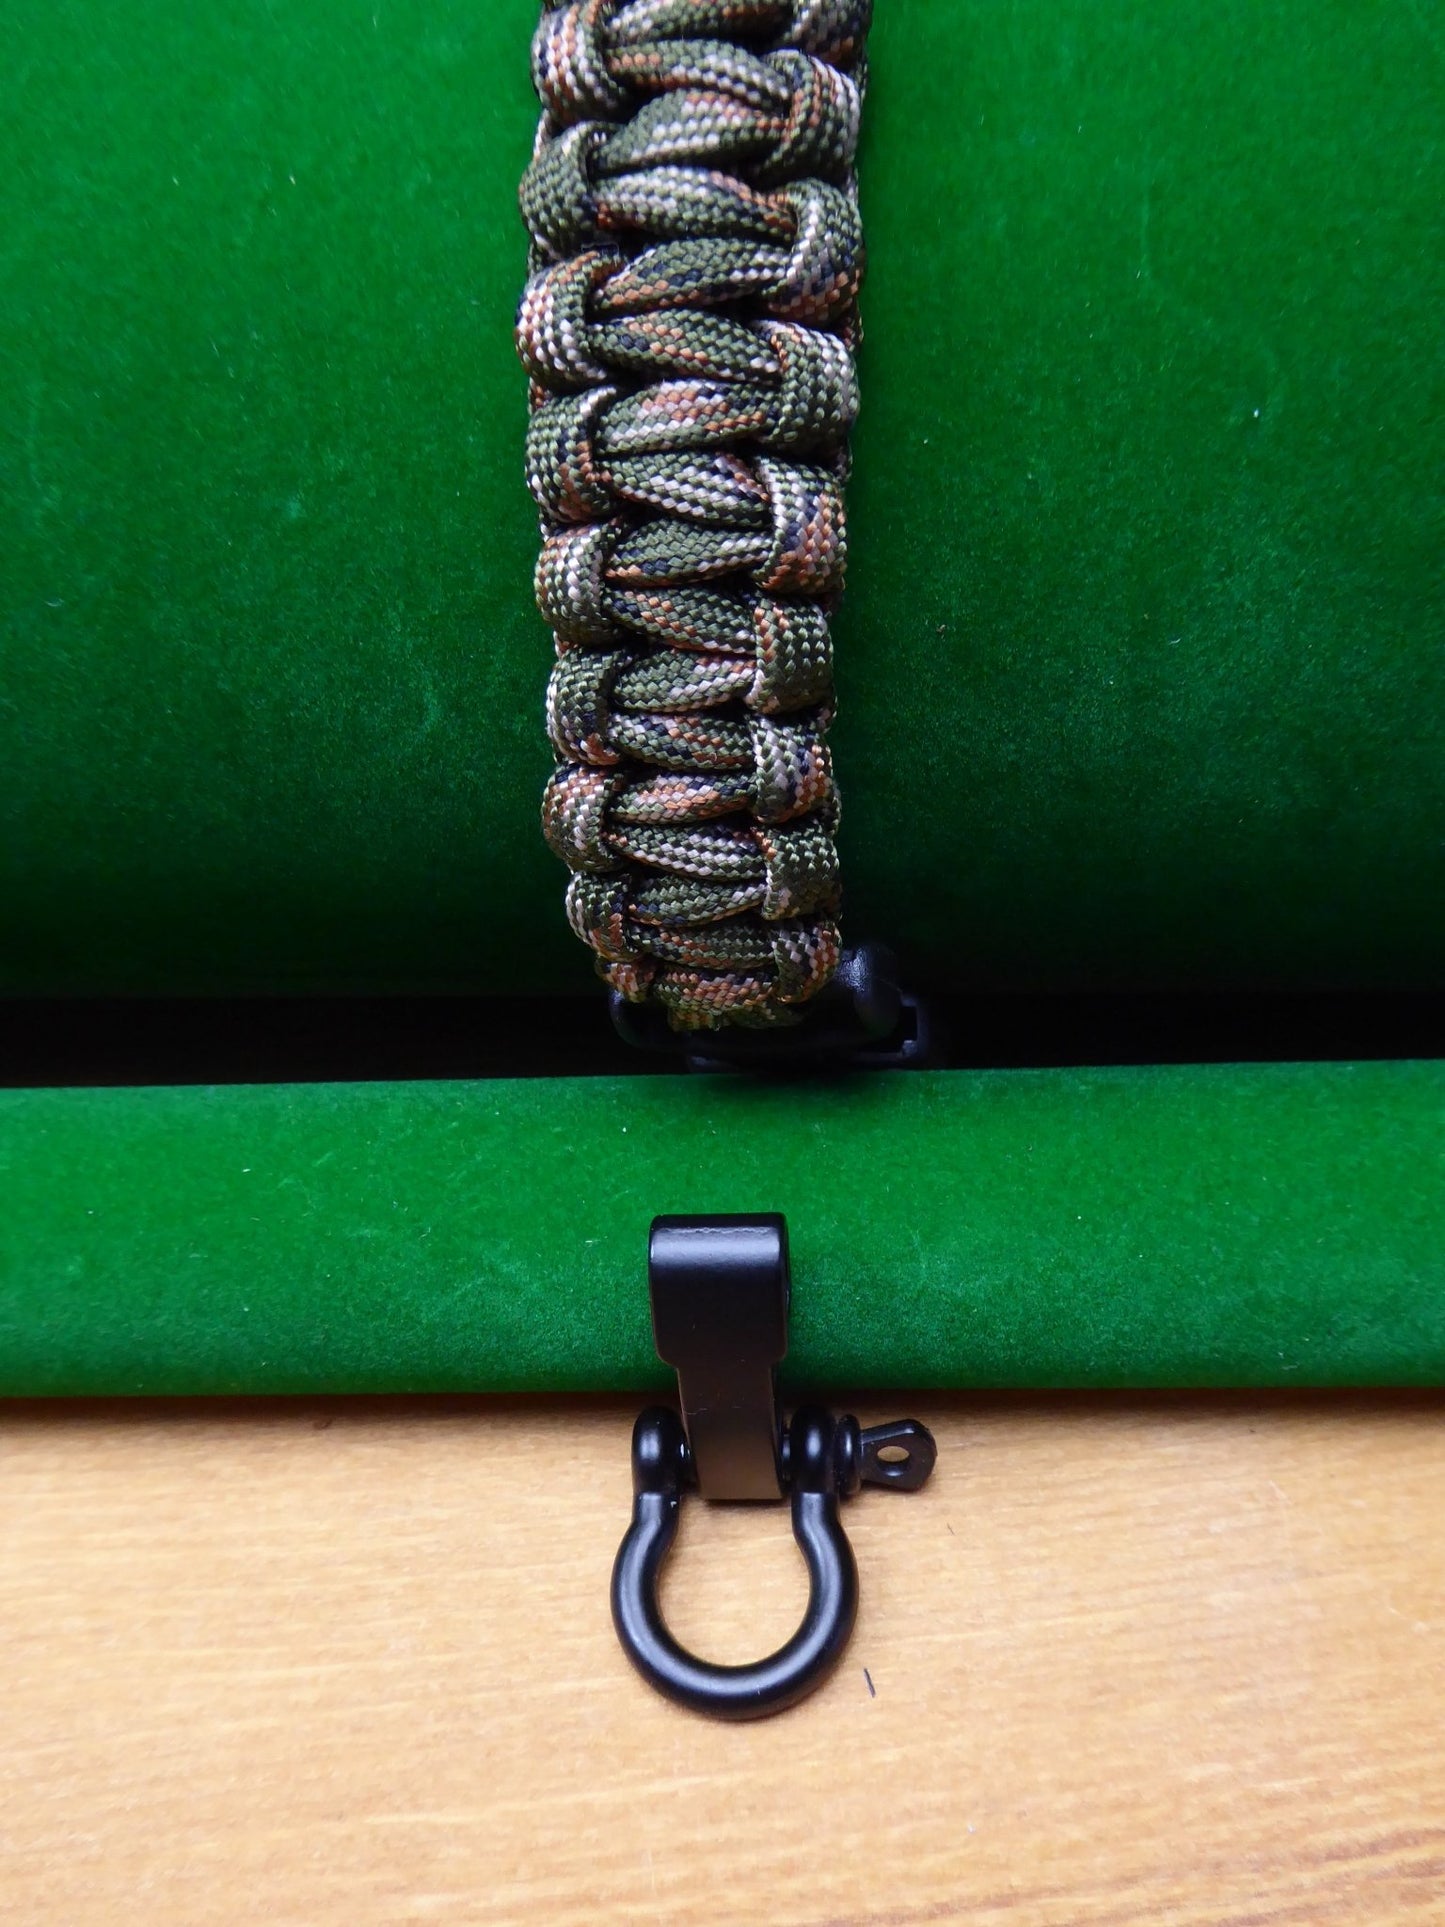 Paracord Buckle Bracelet kits with choice of colours Paracord Huggins Attic Green Camo Black Buckle  [Huggins attic]